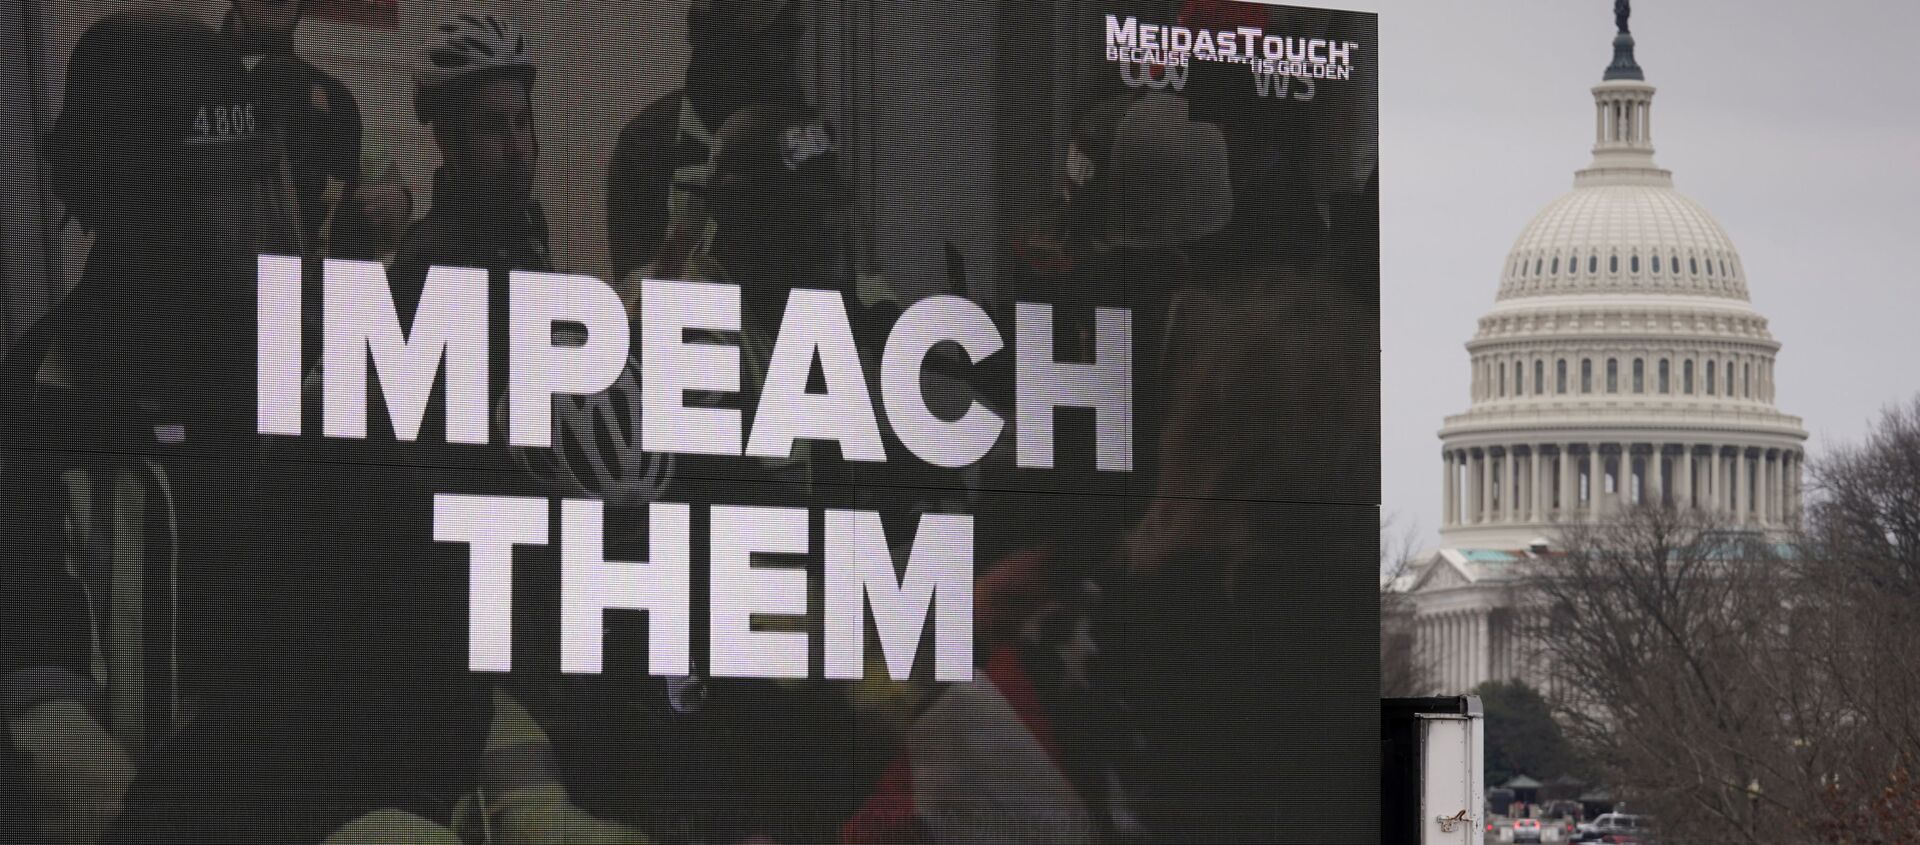 A video screen affixed to a truck flashes an anti-Trump message near the U.S. Capitol during former U.S President Donald Trump's second impeachment trial in Washington, U.S., February 12, 2021 - Sputnik International, 1920, 12.02.2021